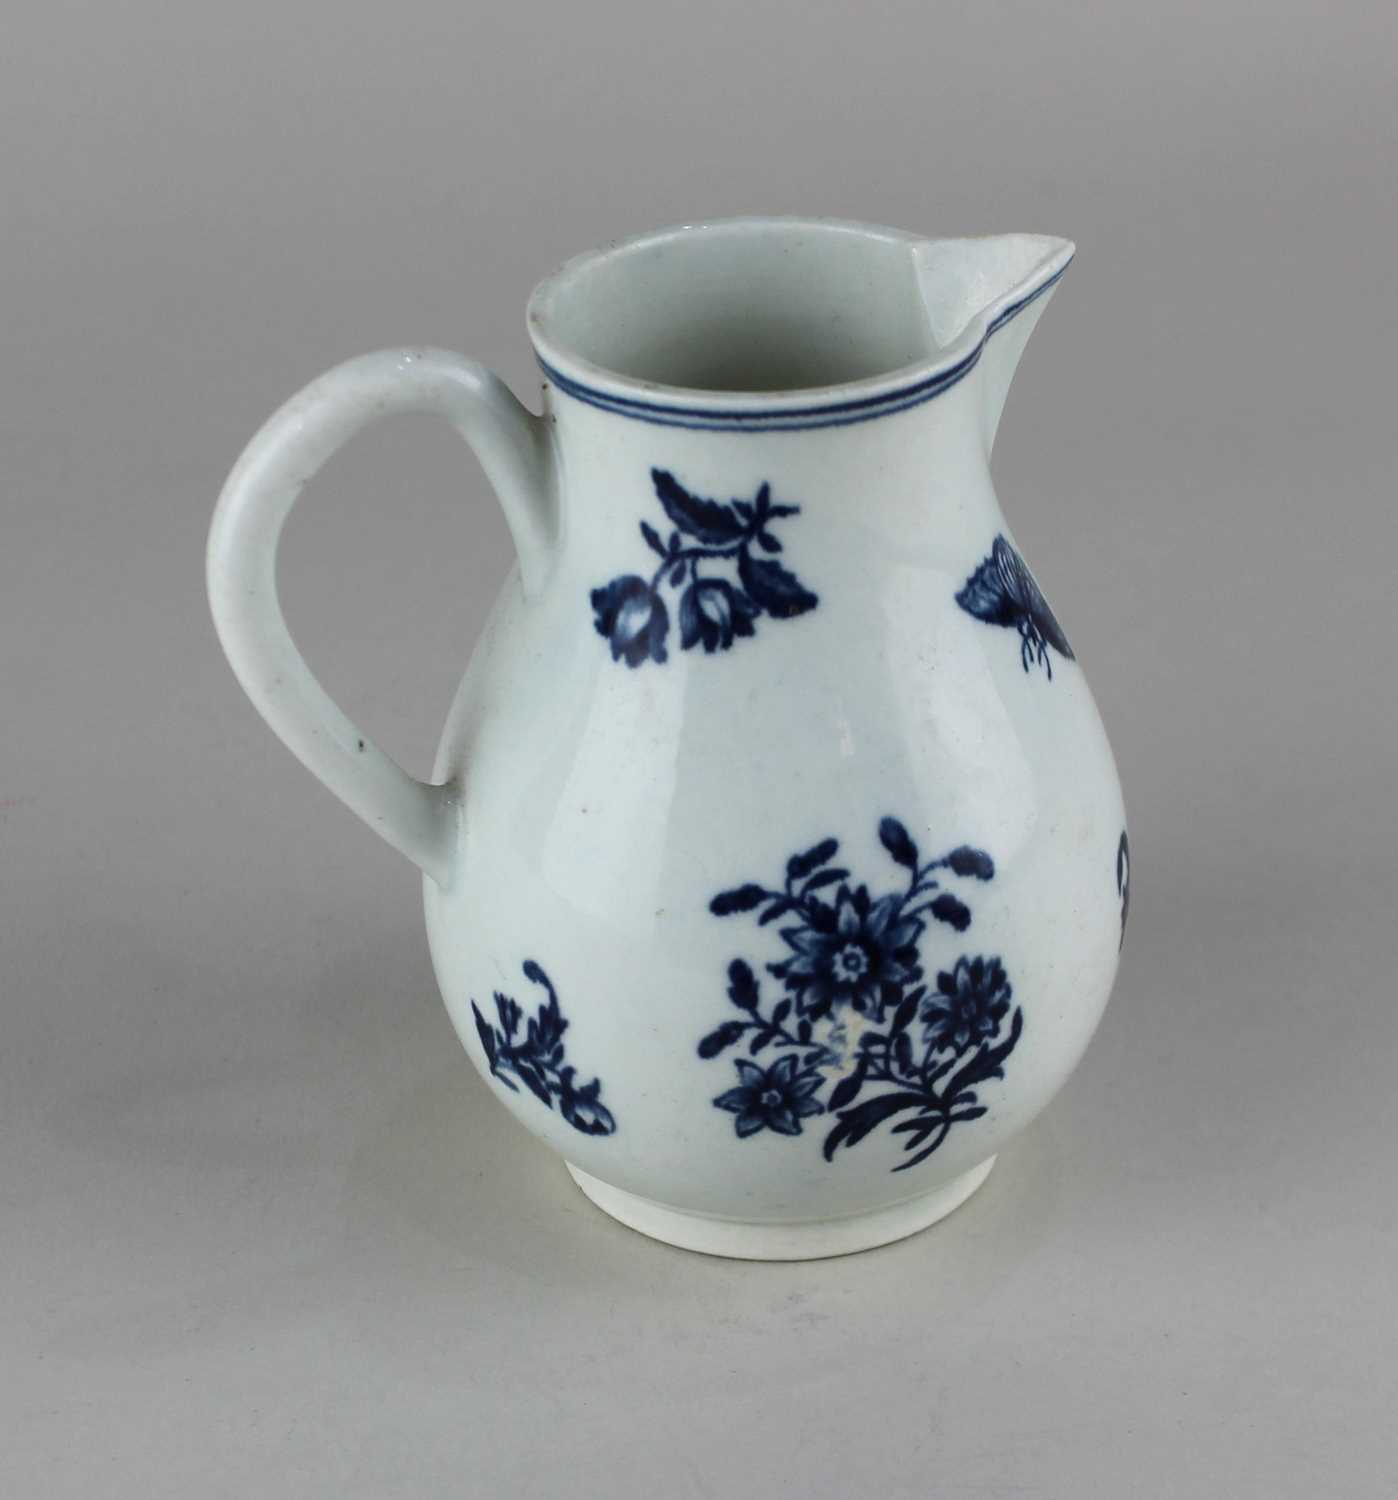 An 18th century Caughley blue and white porcelain milk jug baluster shape decorated with flowers and